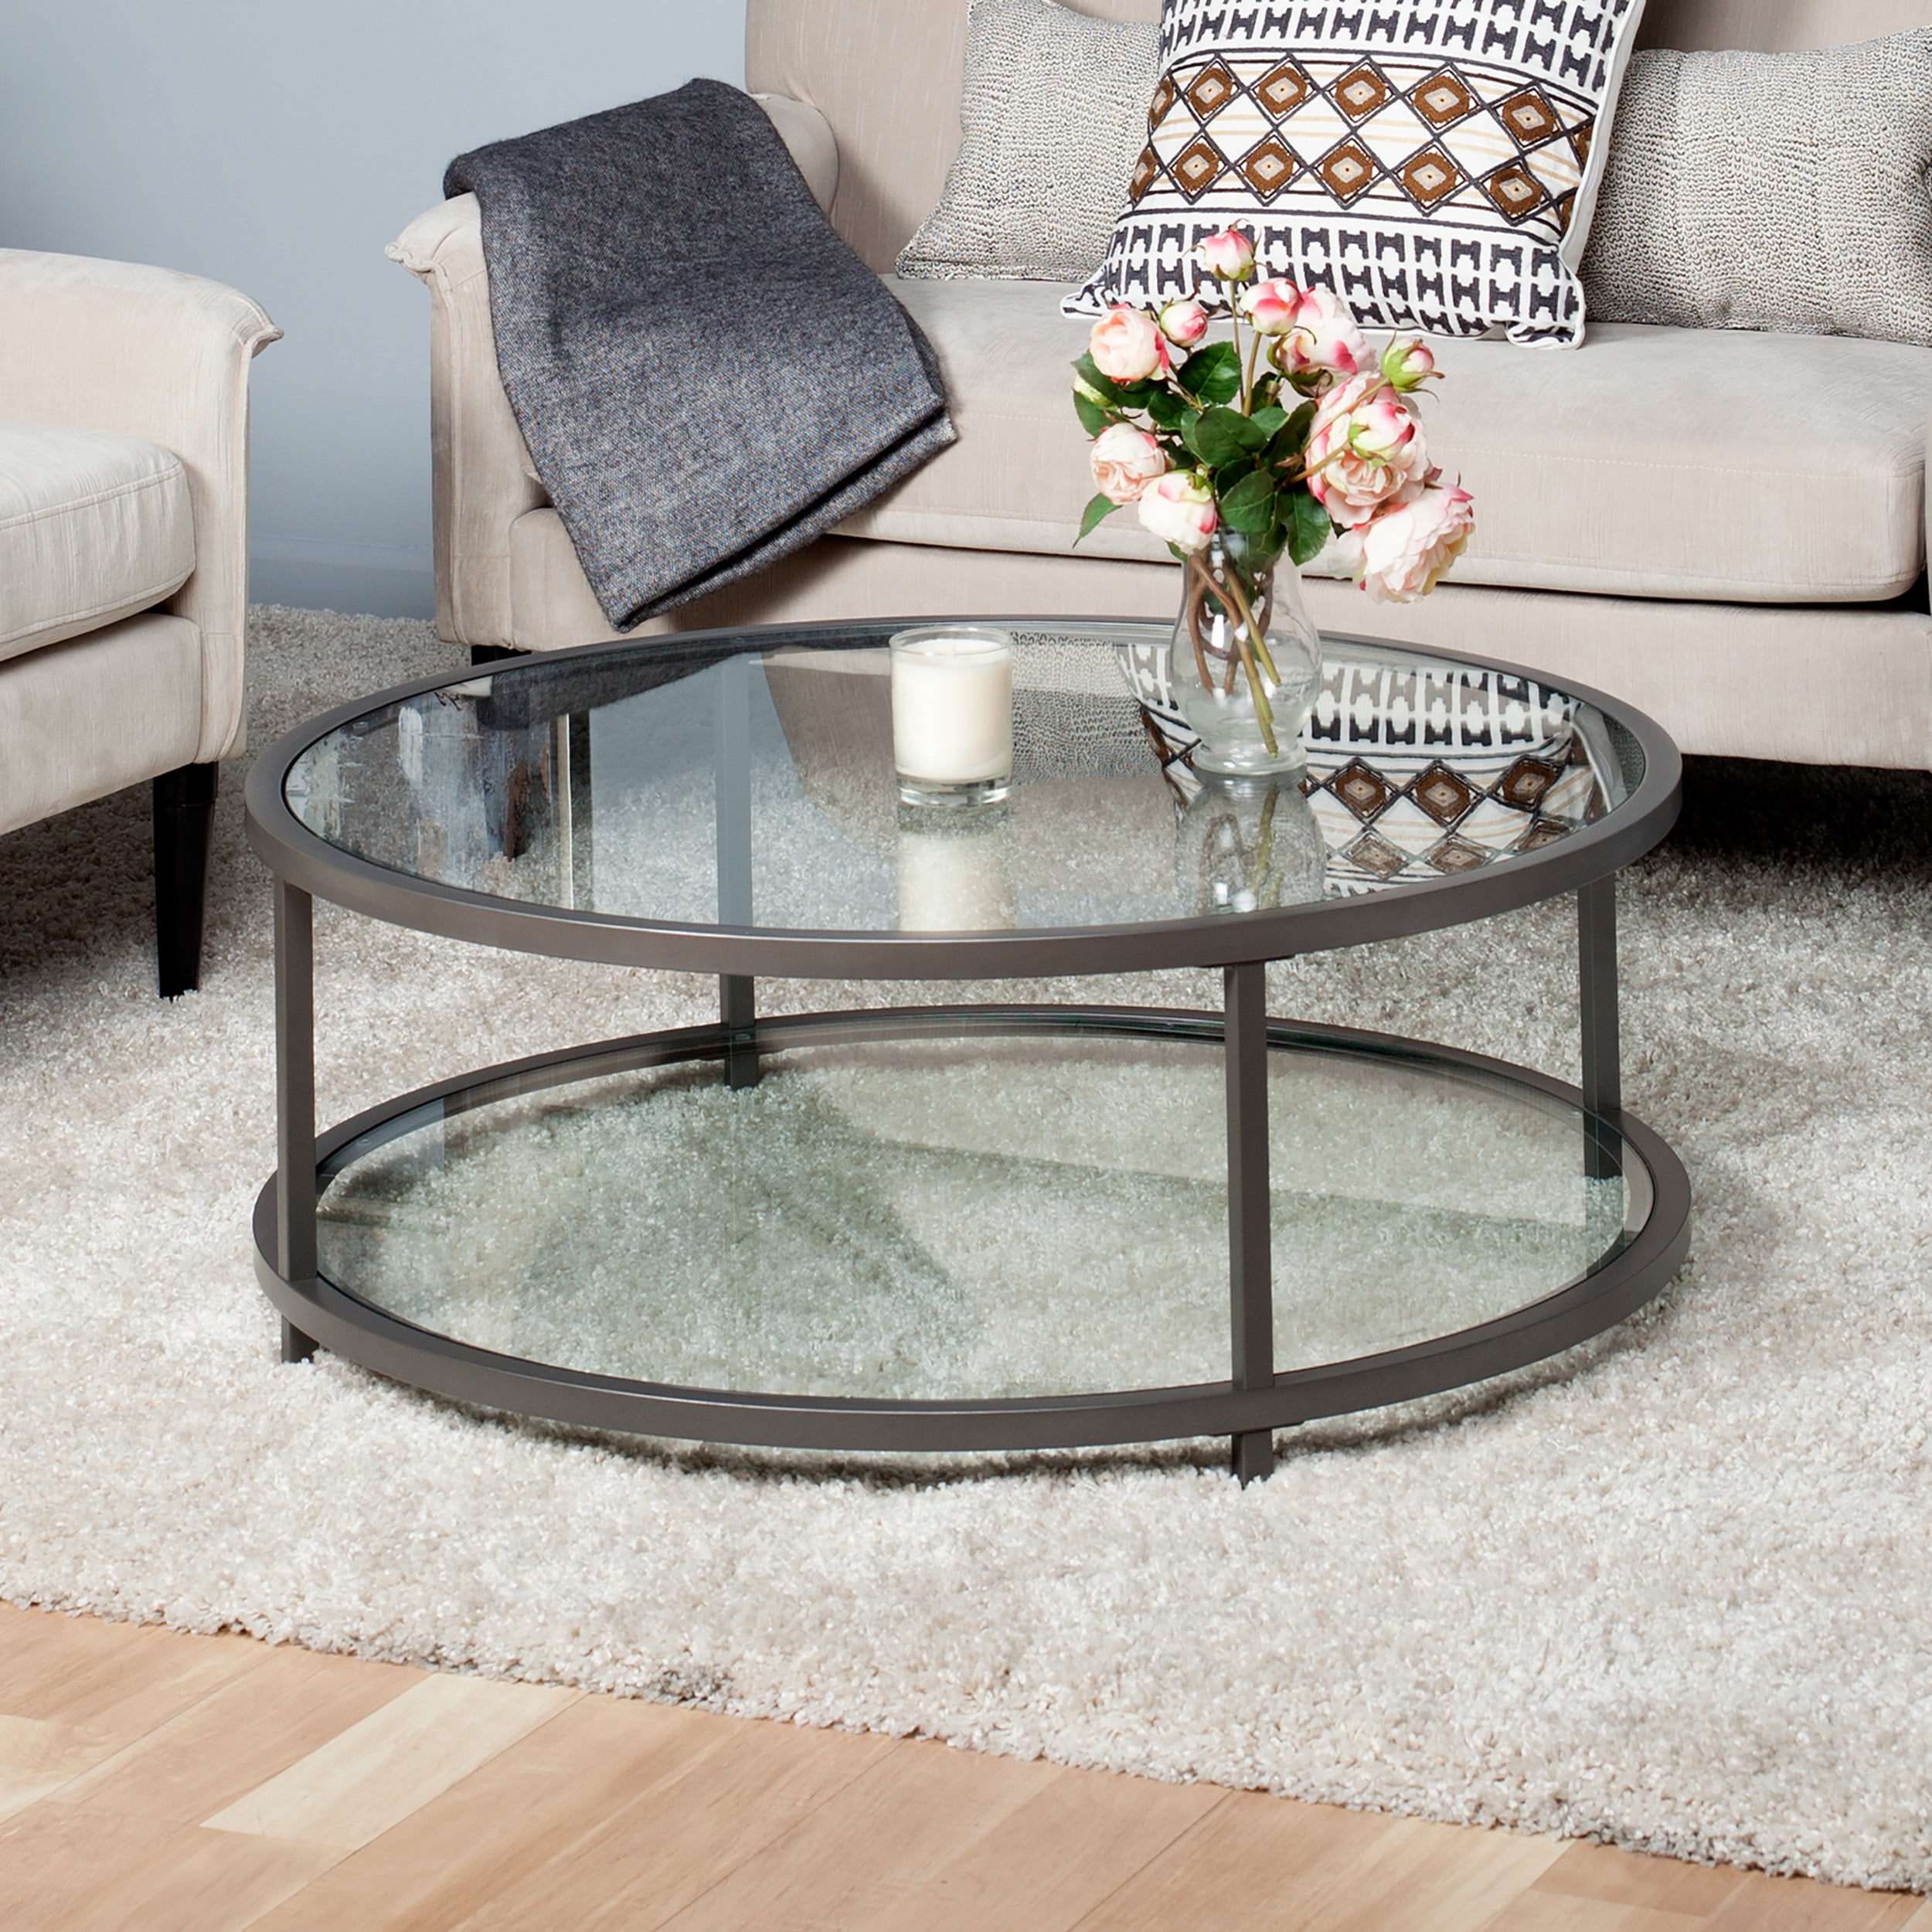 Round Glass Side End Coffee 2 Tier Table Modern Chrome Living Room Furniture